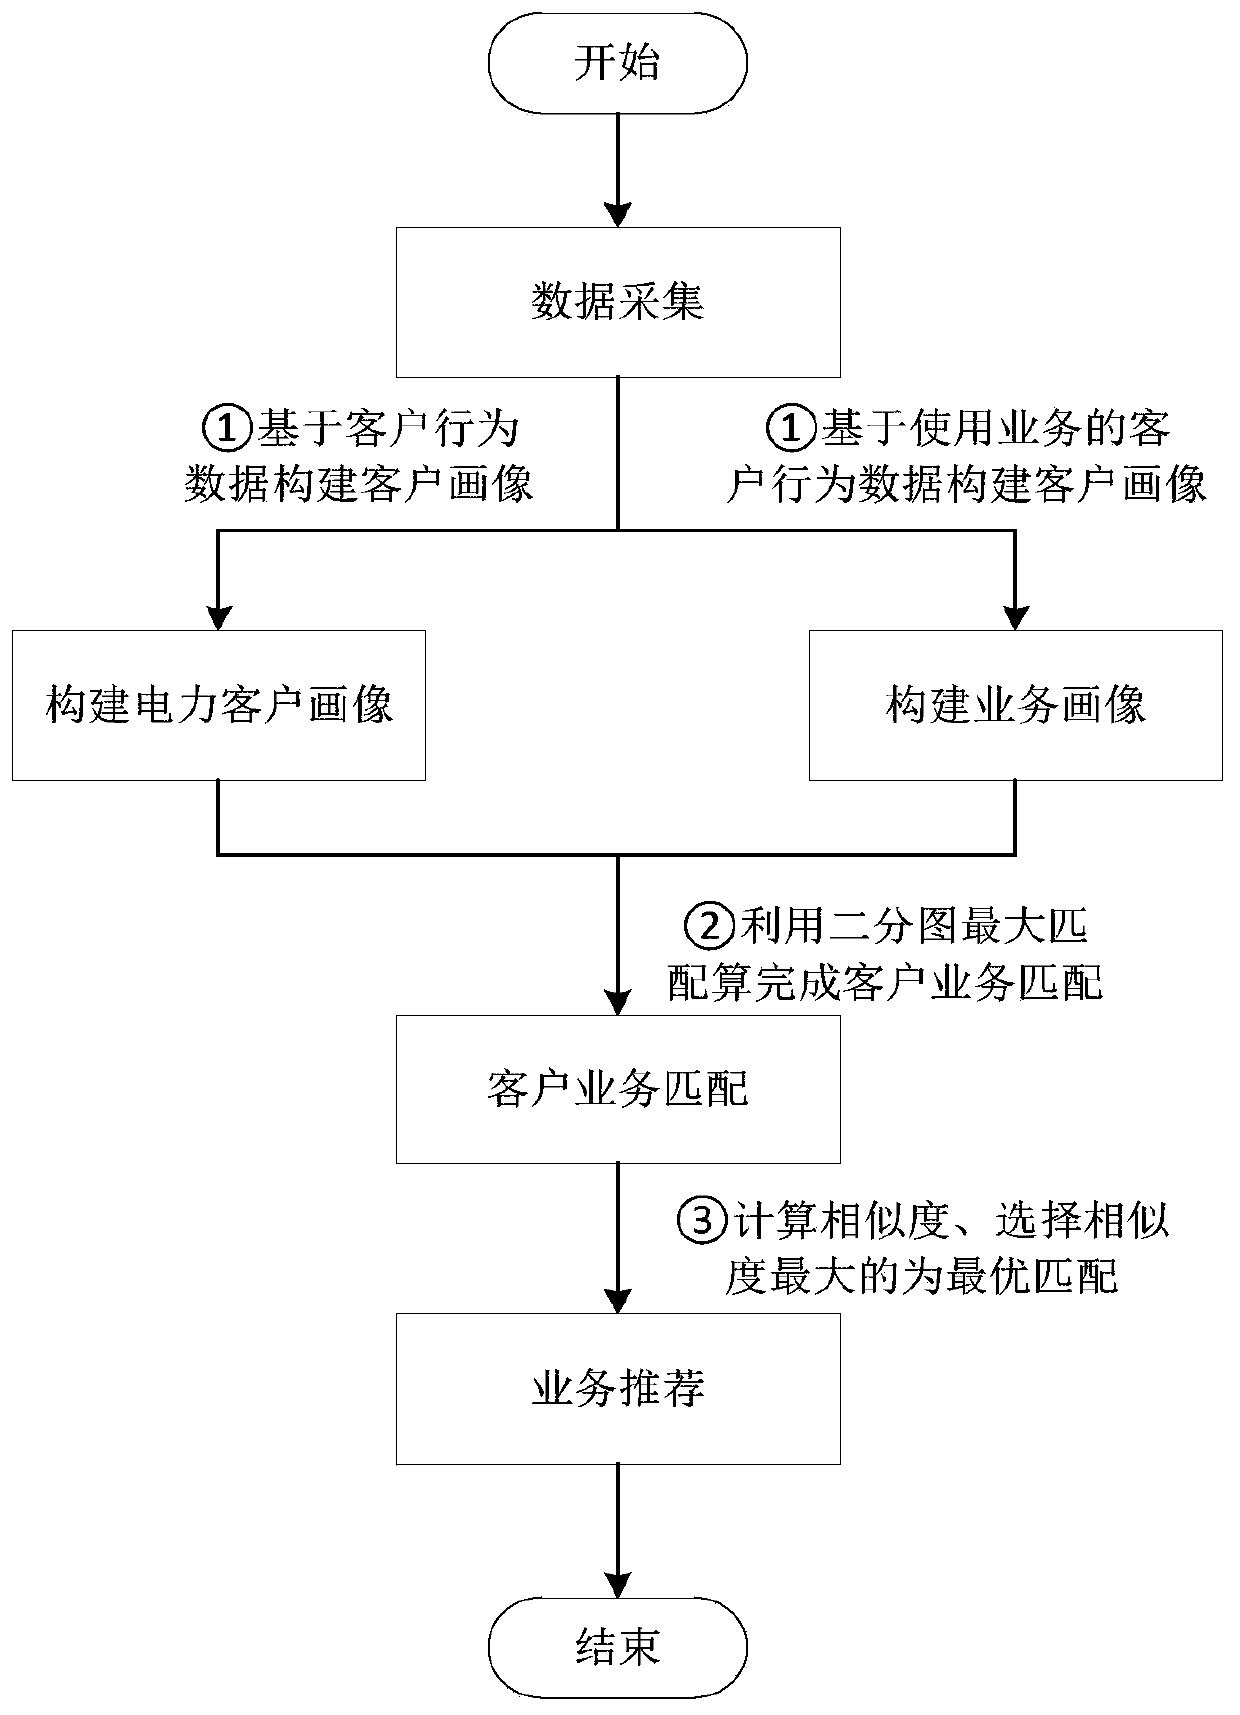 Information recommendation method and system based on multi-path optimization matching